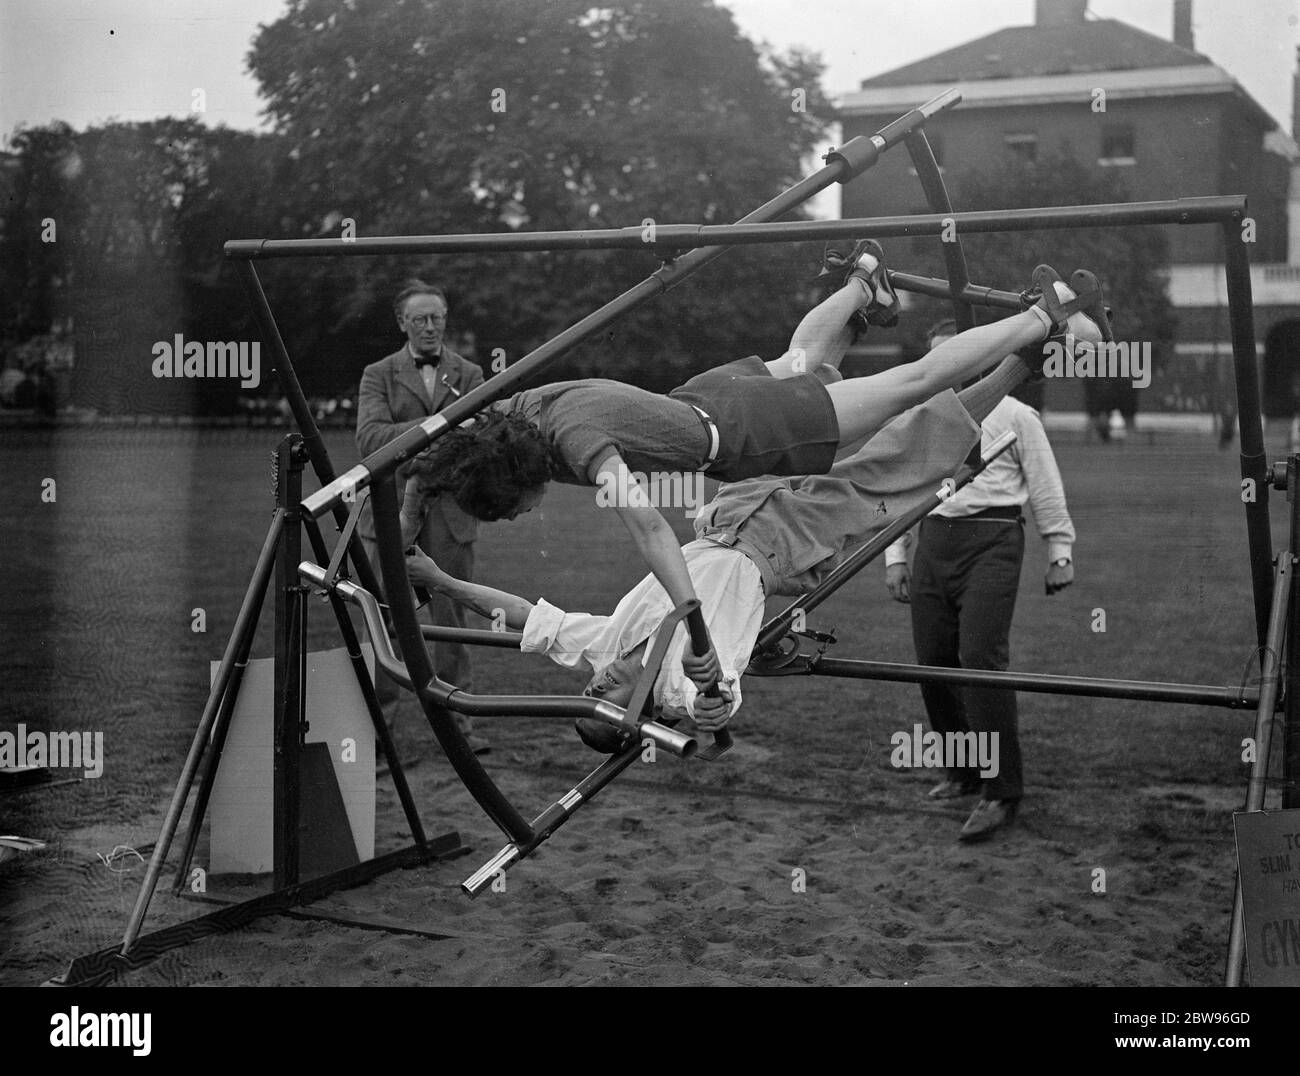 Society ' s latest slimmer seen at Conocours D' elegance at Chelsea . The Gymo Frame , a new slimming and exercising device , was shown at the Summer Fete and Concours d ' Elegance in aid of Disabled soldiers officers garden home at the Duke of Yorks headquarters at Chelsea , London . The new gymnastic frame . 14 July 1932 Stock Photo